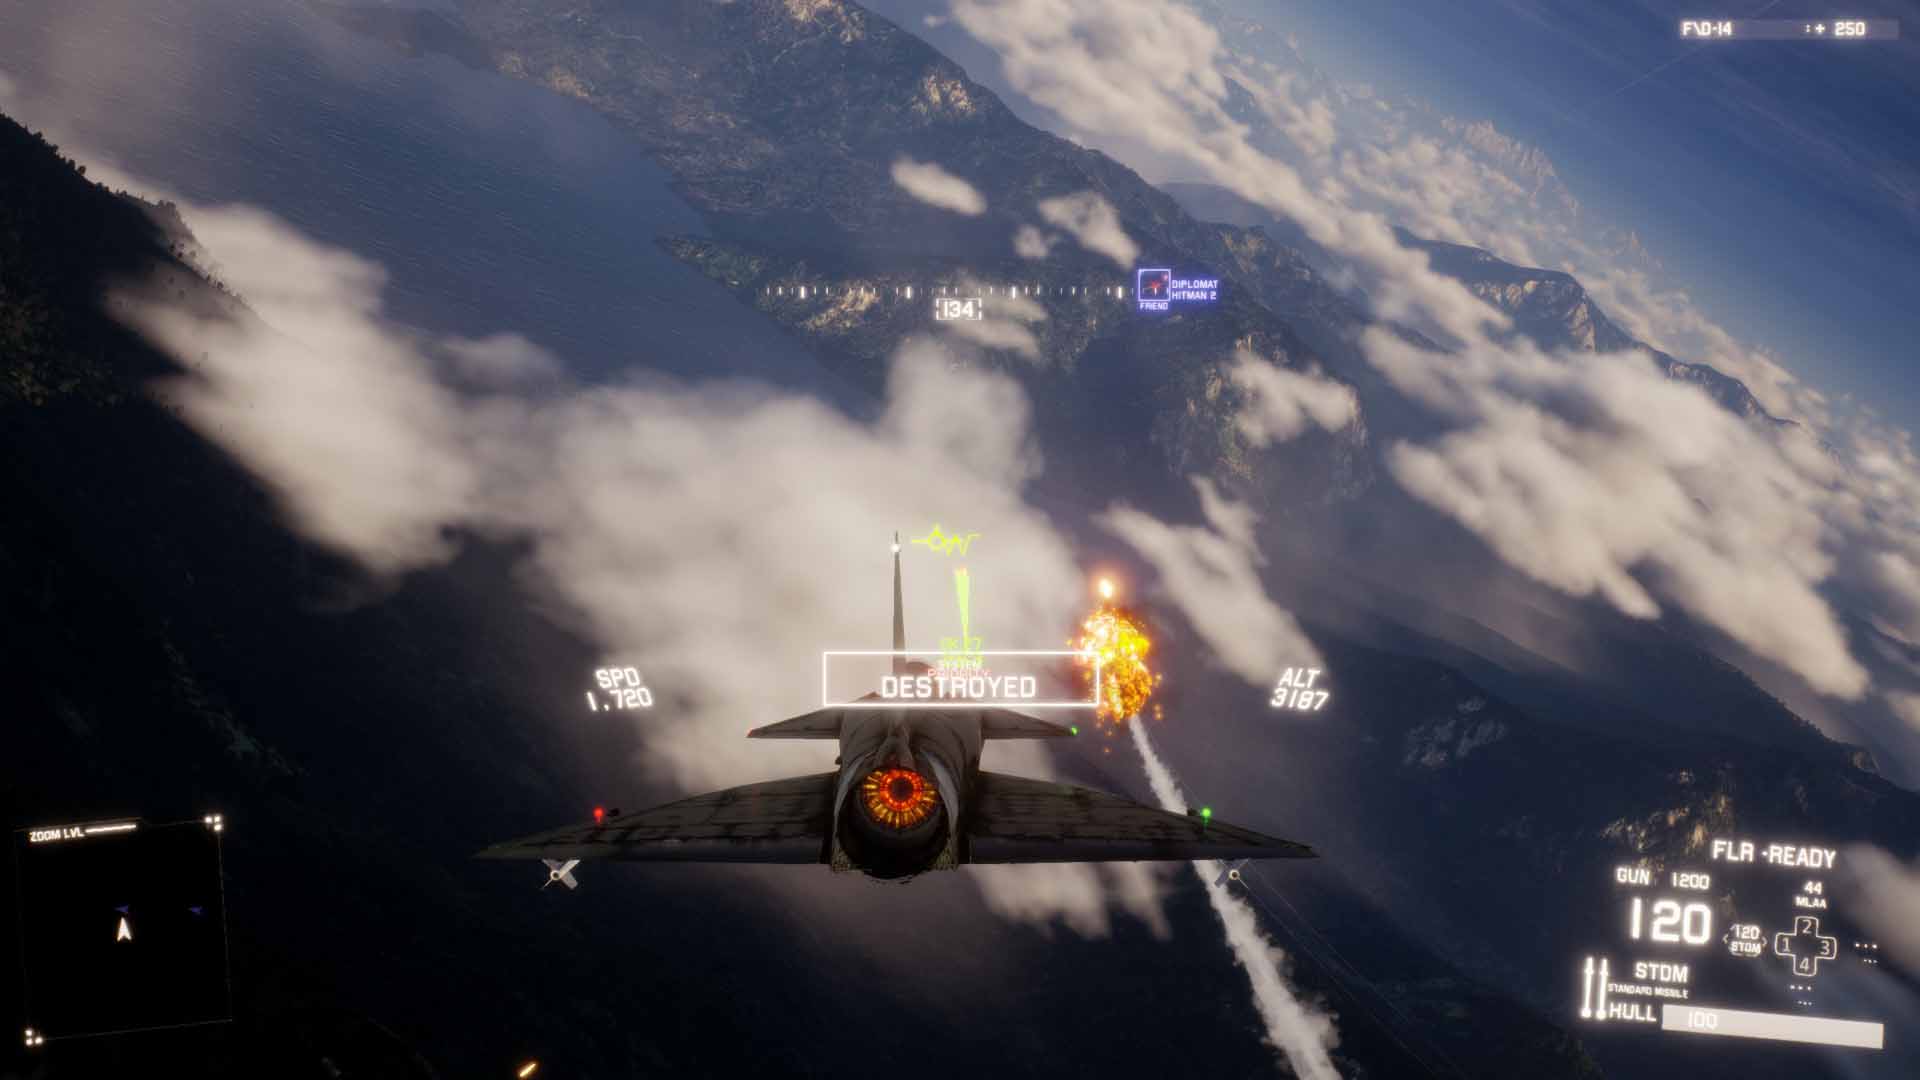 download free project wingman game pass